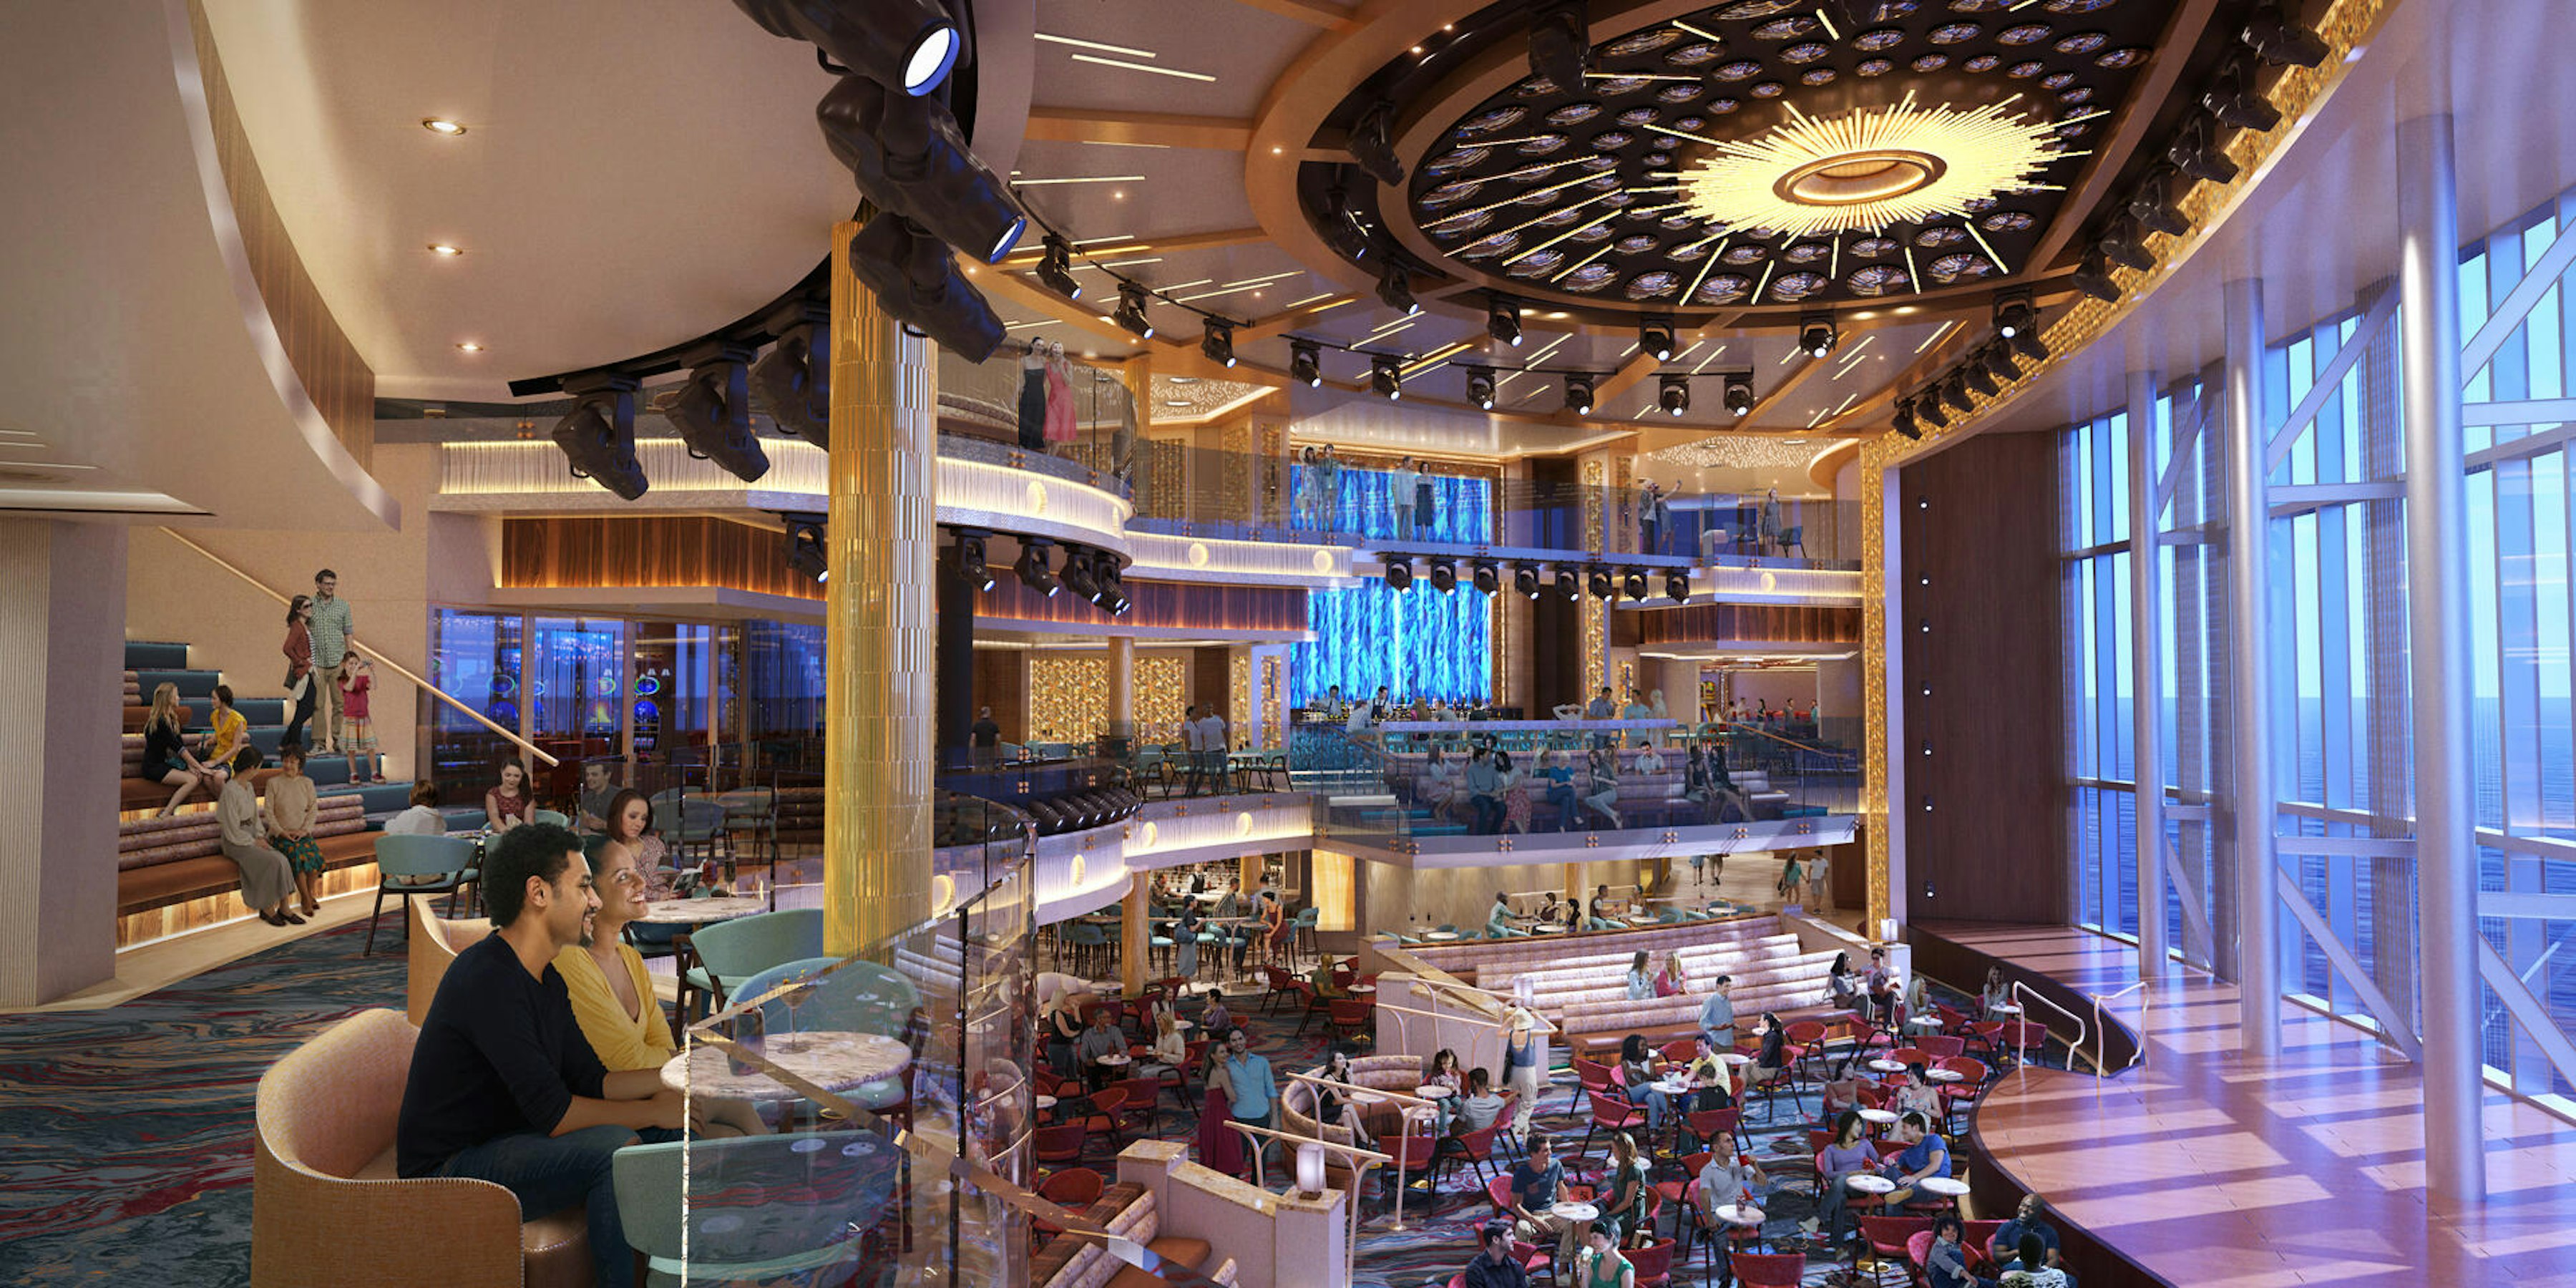 Photos of Carnival Mardi Gras Cruise Ship, Before Its 2021 Debut